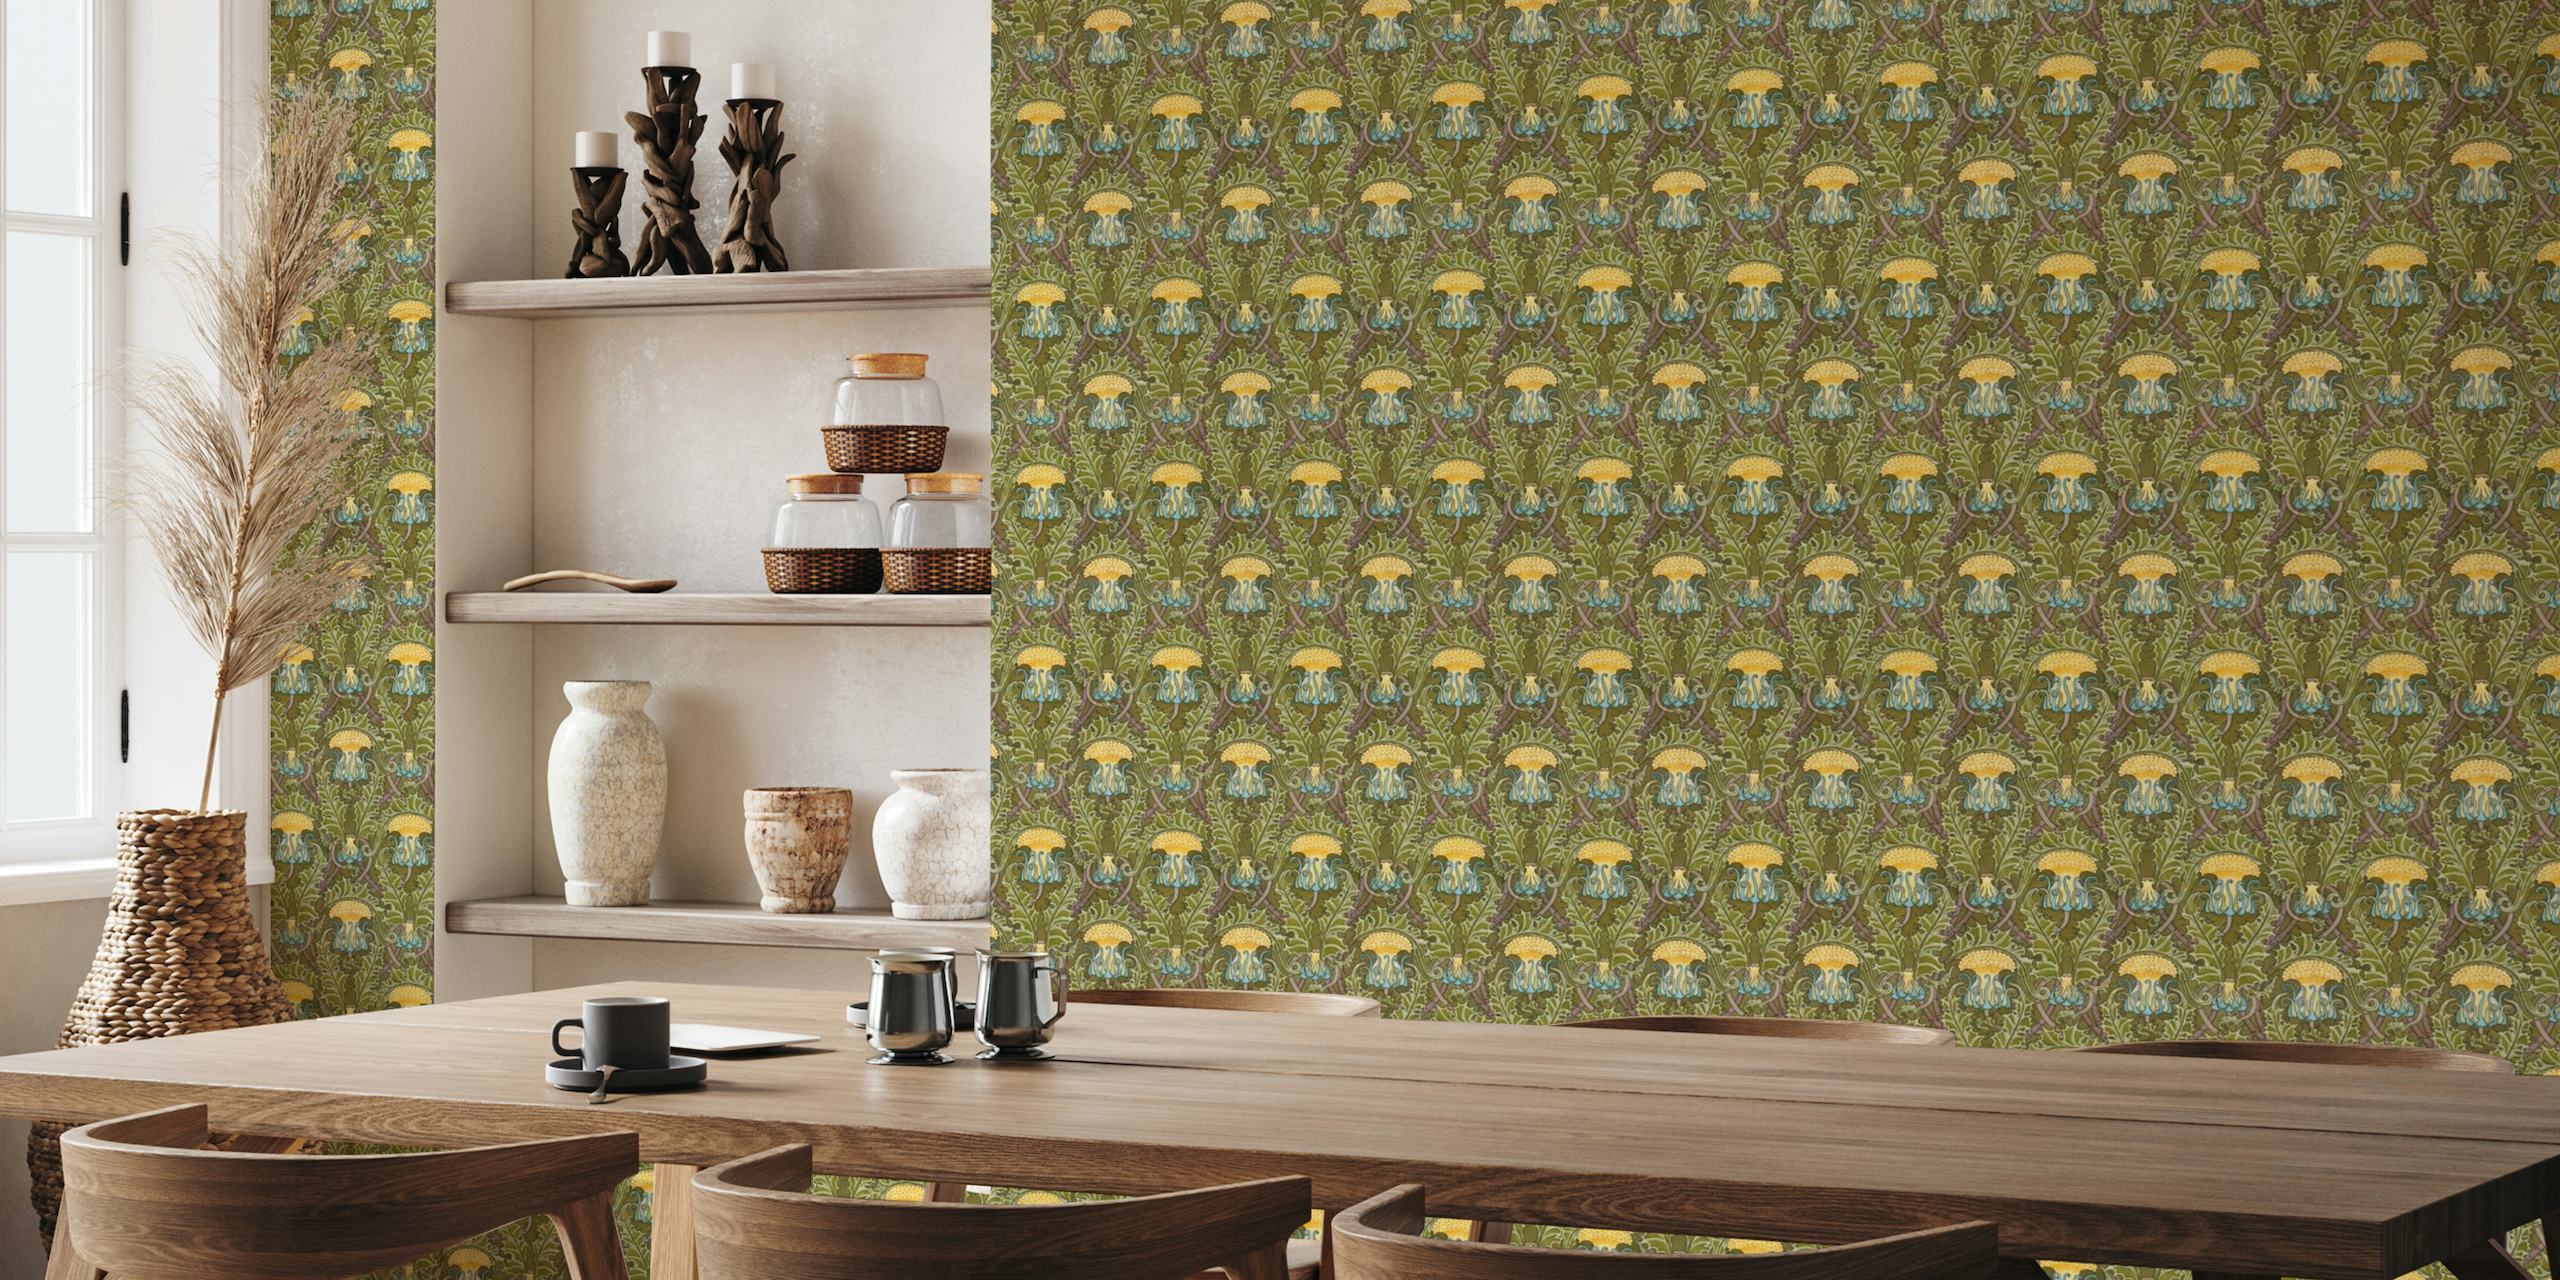 Dandelion Flowers Arts and Crafts style wallpaper mural design by Maurice Pillard Verneuil.